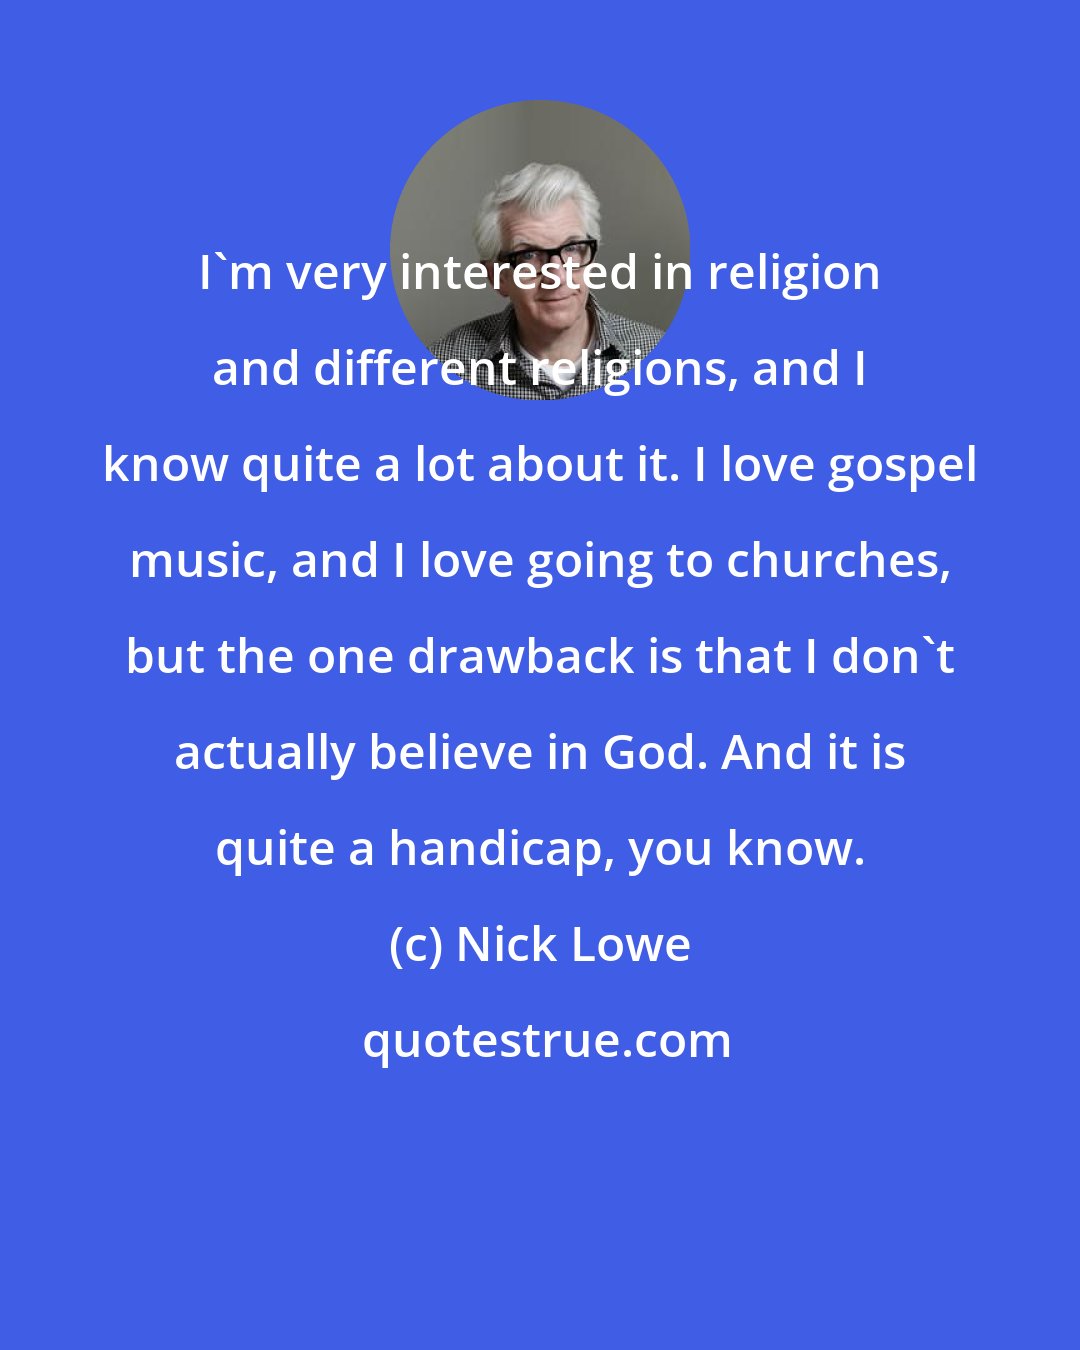 Nick Lowe: I'm very interested in religion and different religions, and I know quite a lot about it. I love gospel music, and I love going to churches, but the one drawback is that I don't actually believe in God. And it is quite a handicap, you know.